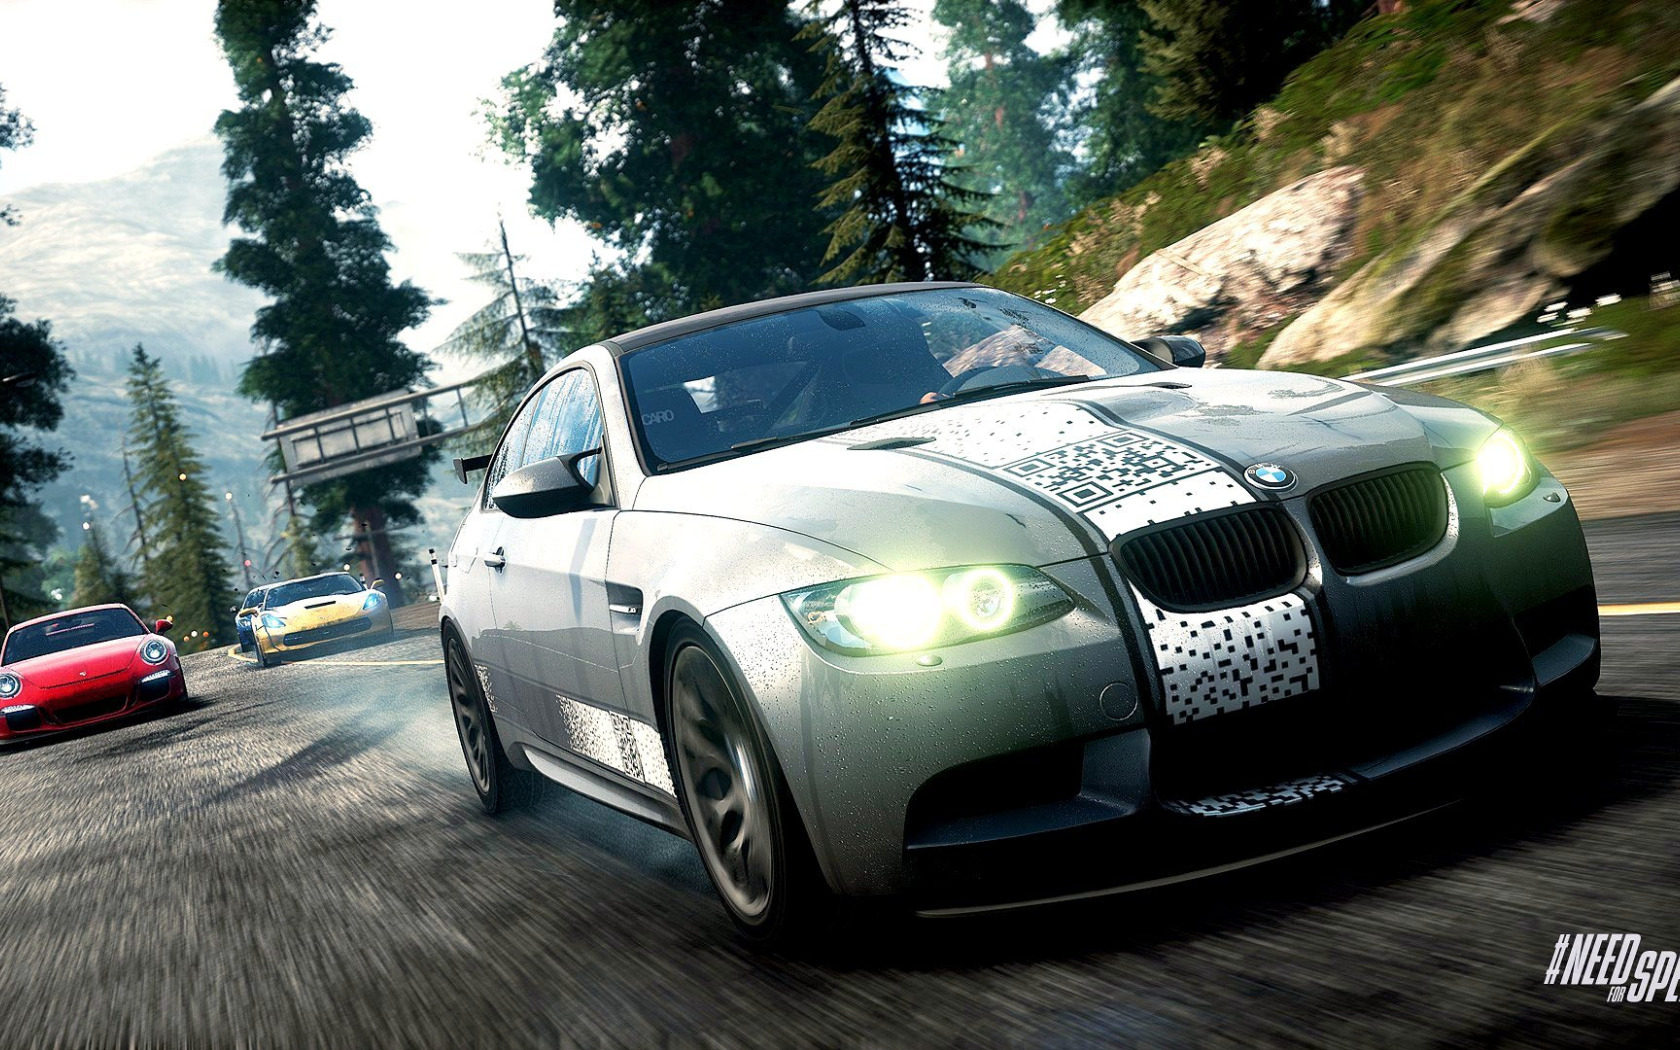 Need for Speed Rivals Xbox 360. Need for Speed Rivals BMW m3 GTR. Игра NFS Rivals. Need for Speed Rivals 2013.